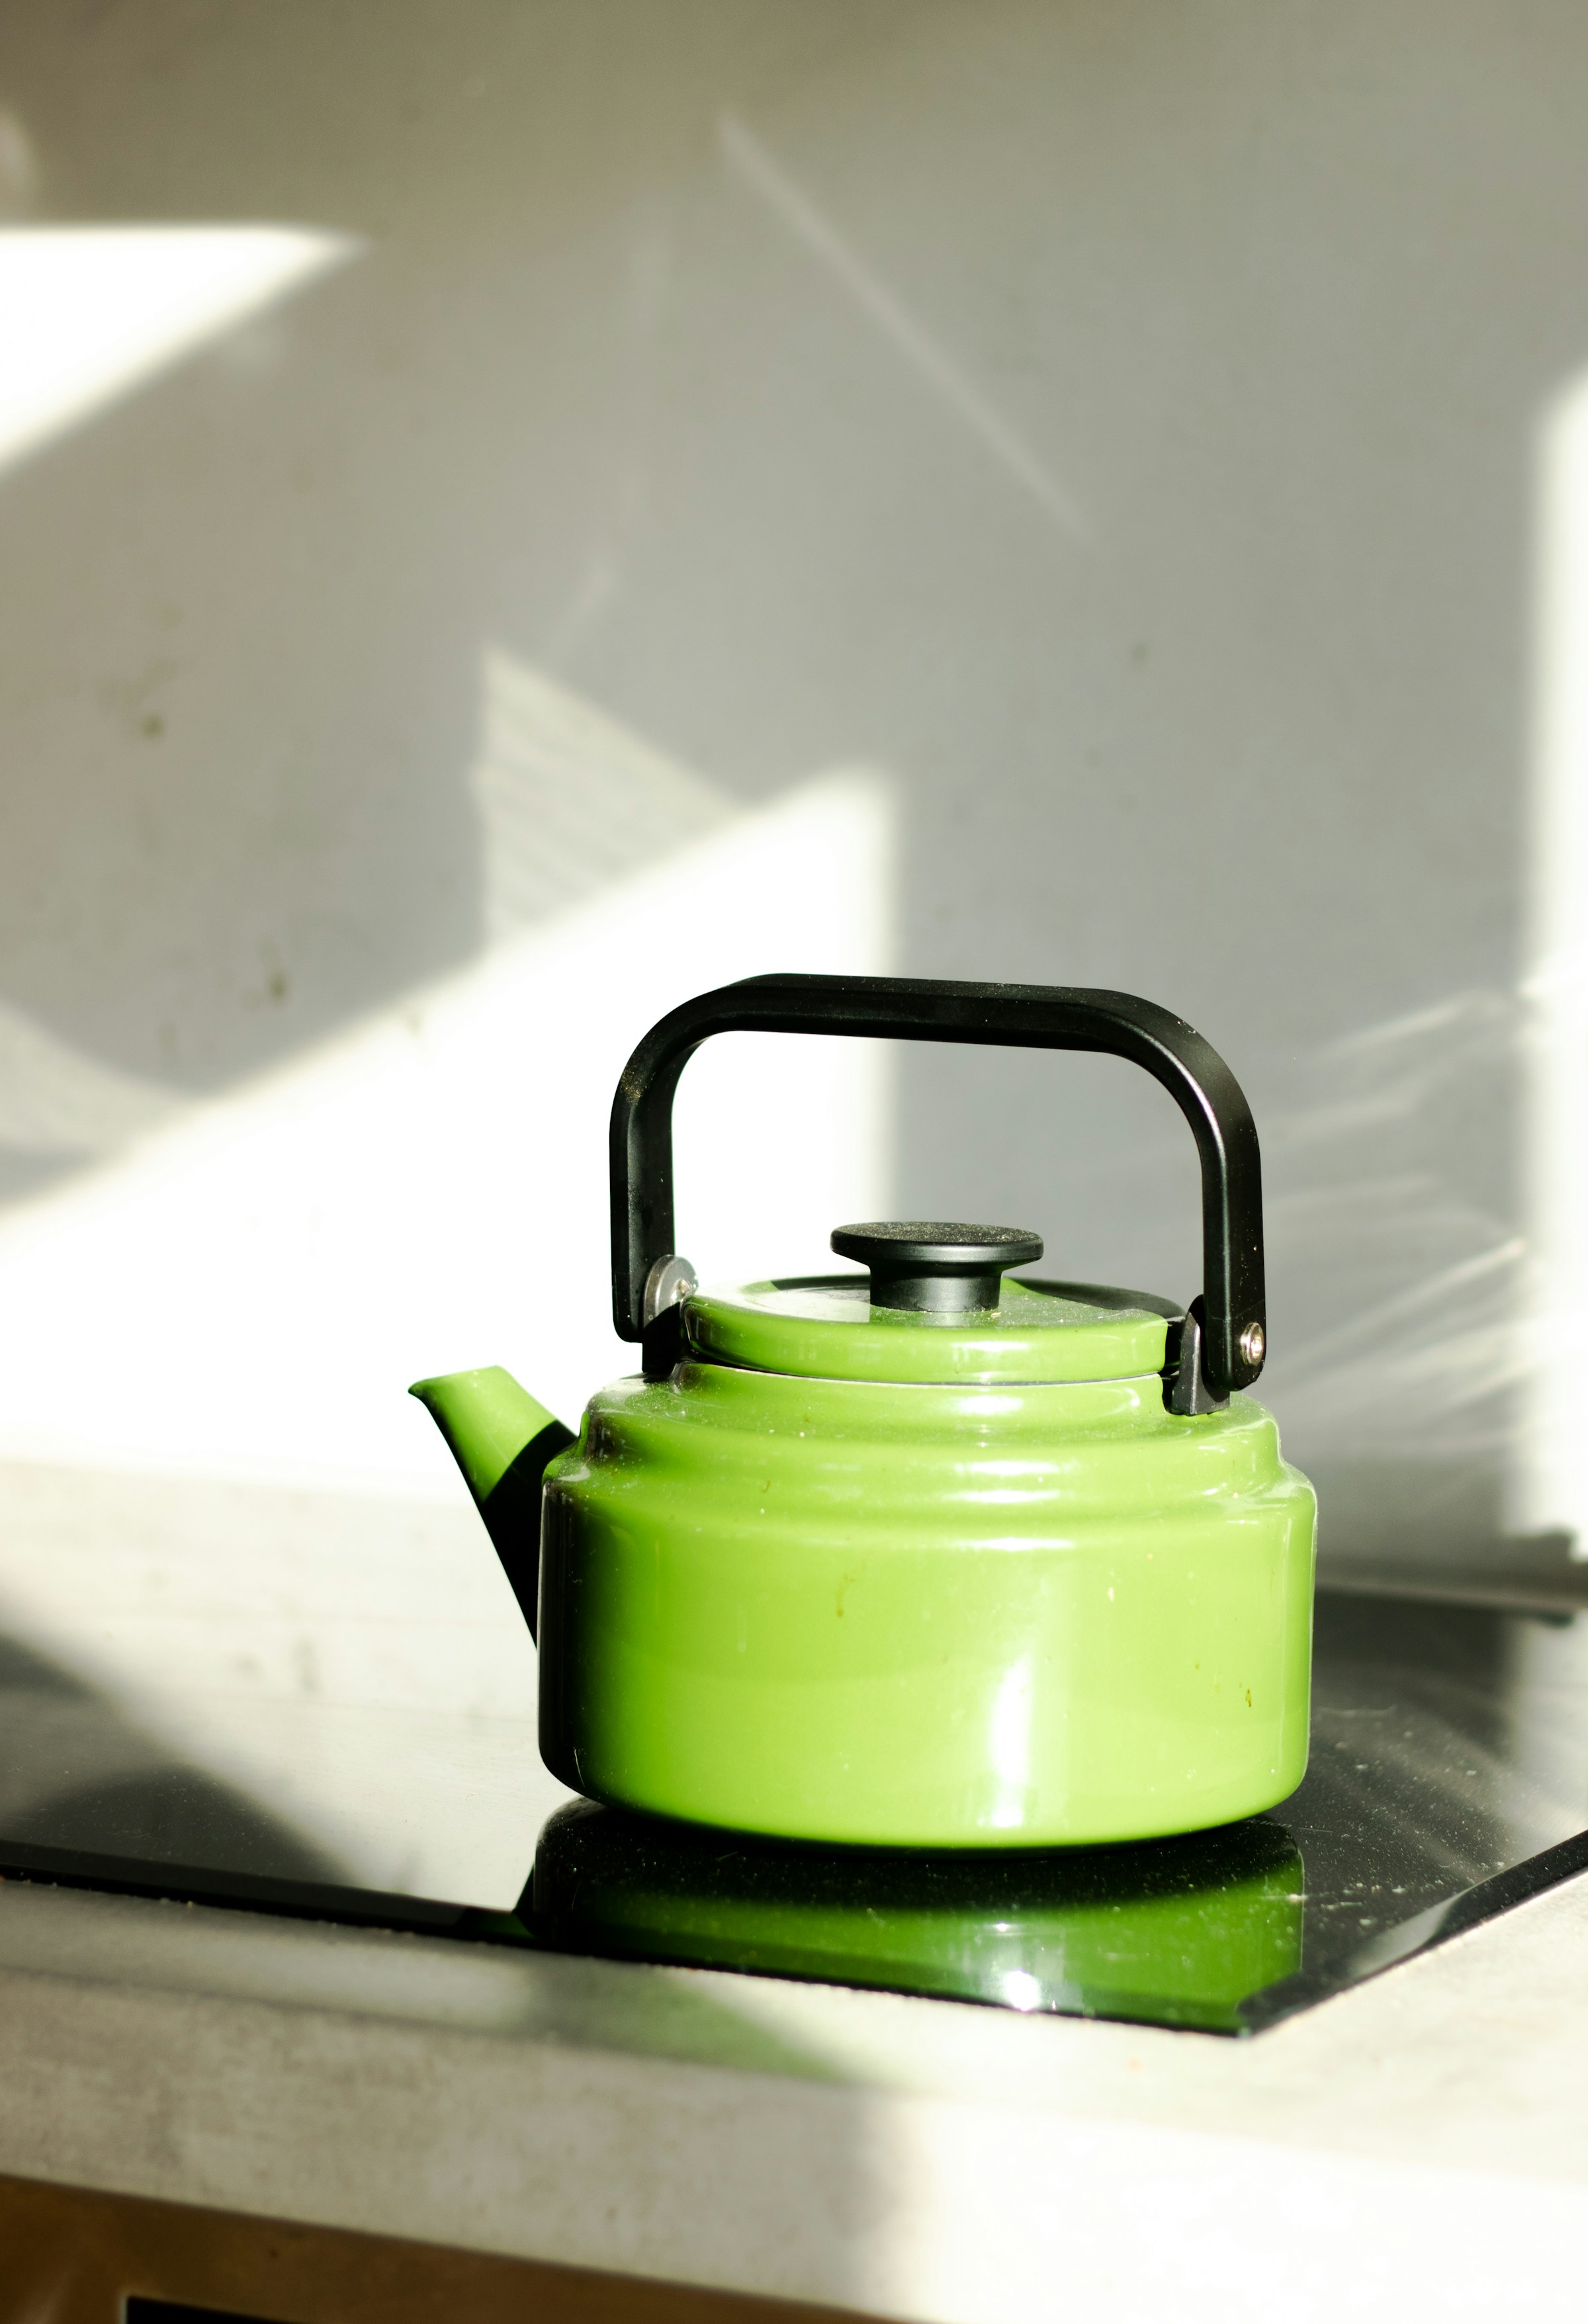 A green kettle on the stove | Source: Unsplash